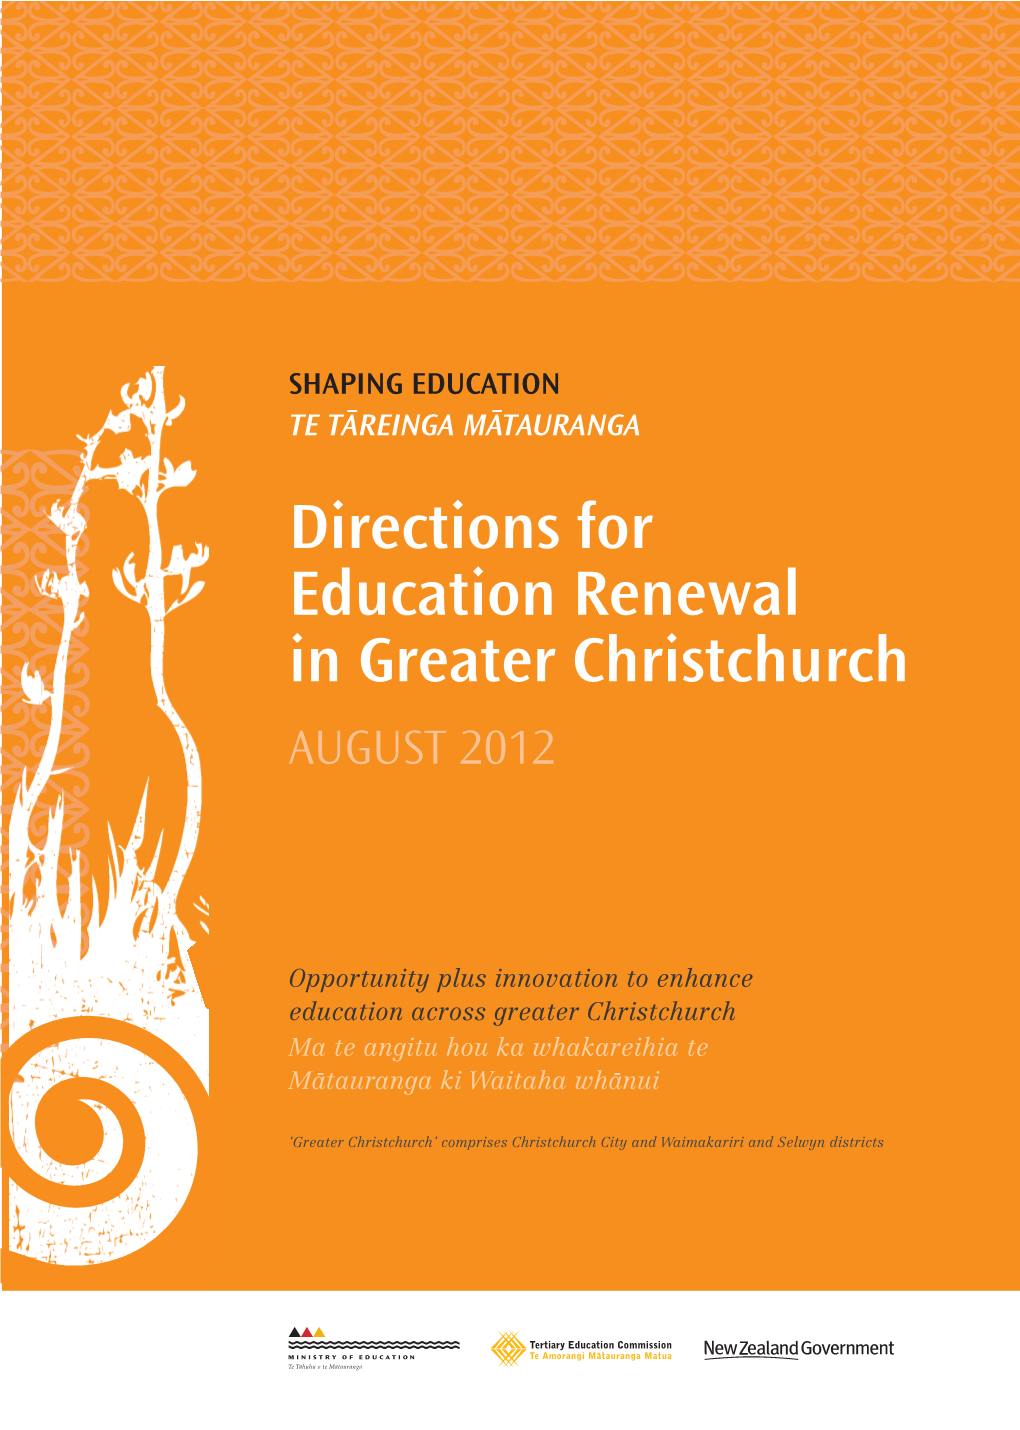 Directions for Education Renewal in Greater Christchurch AUGUST 2012